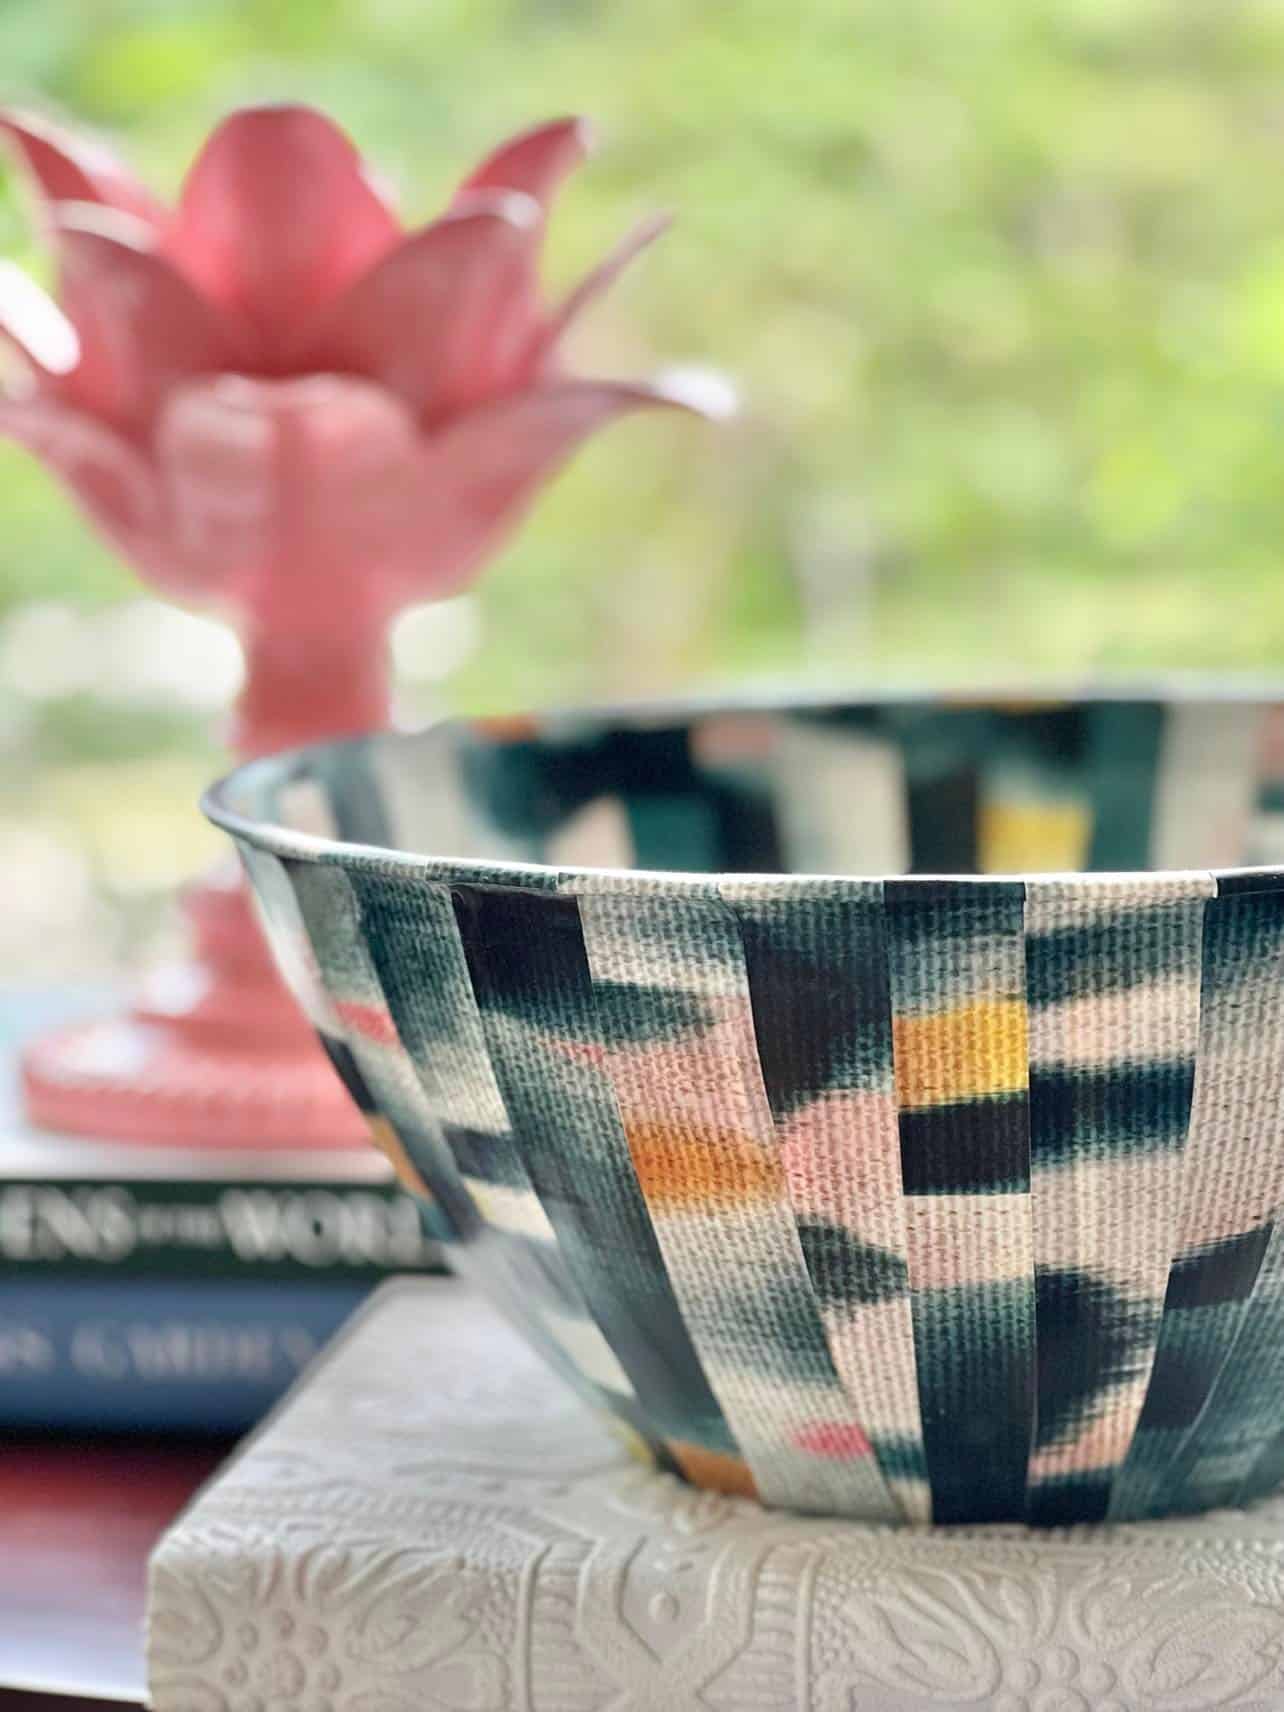 Craft A Decorative Wallpaper Bowl for under $5